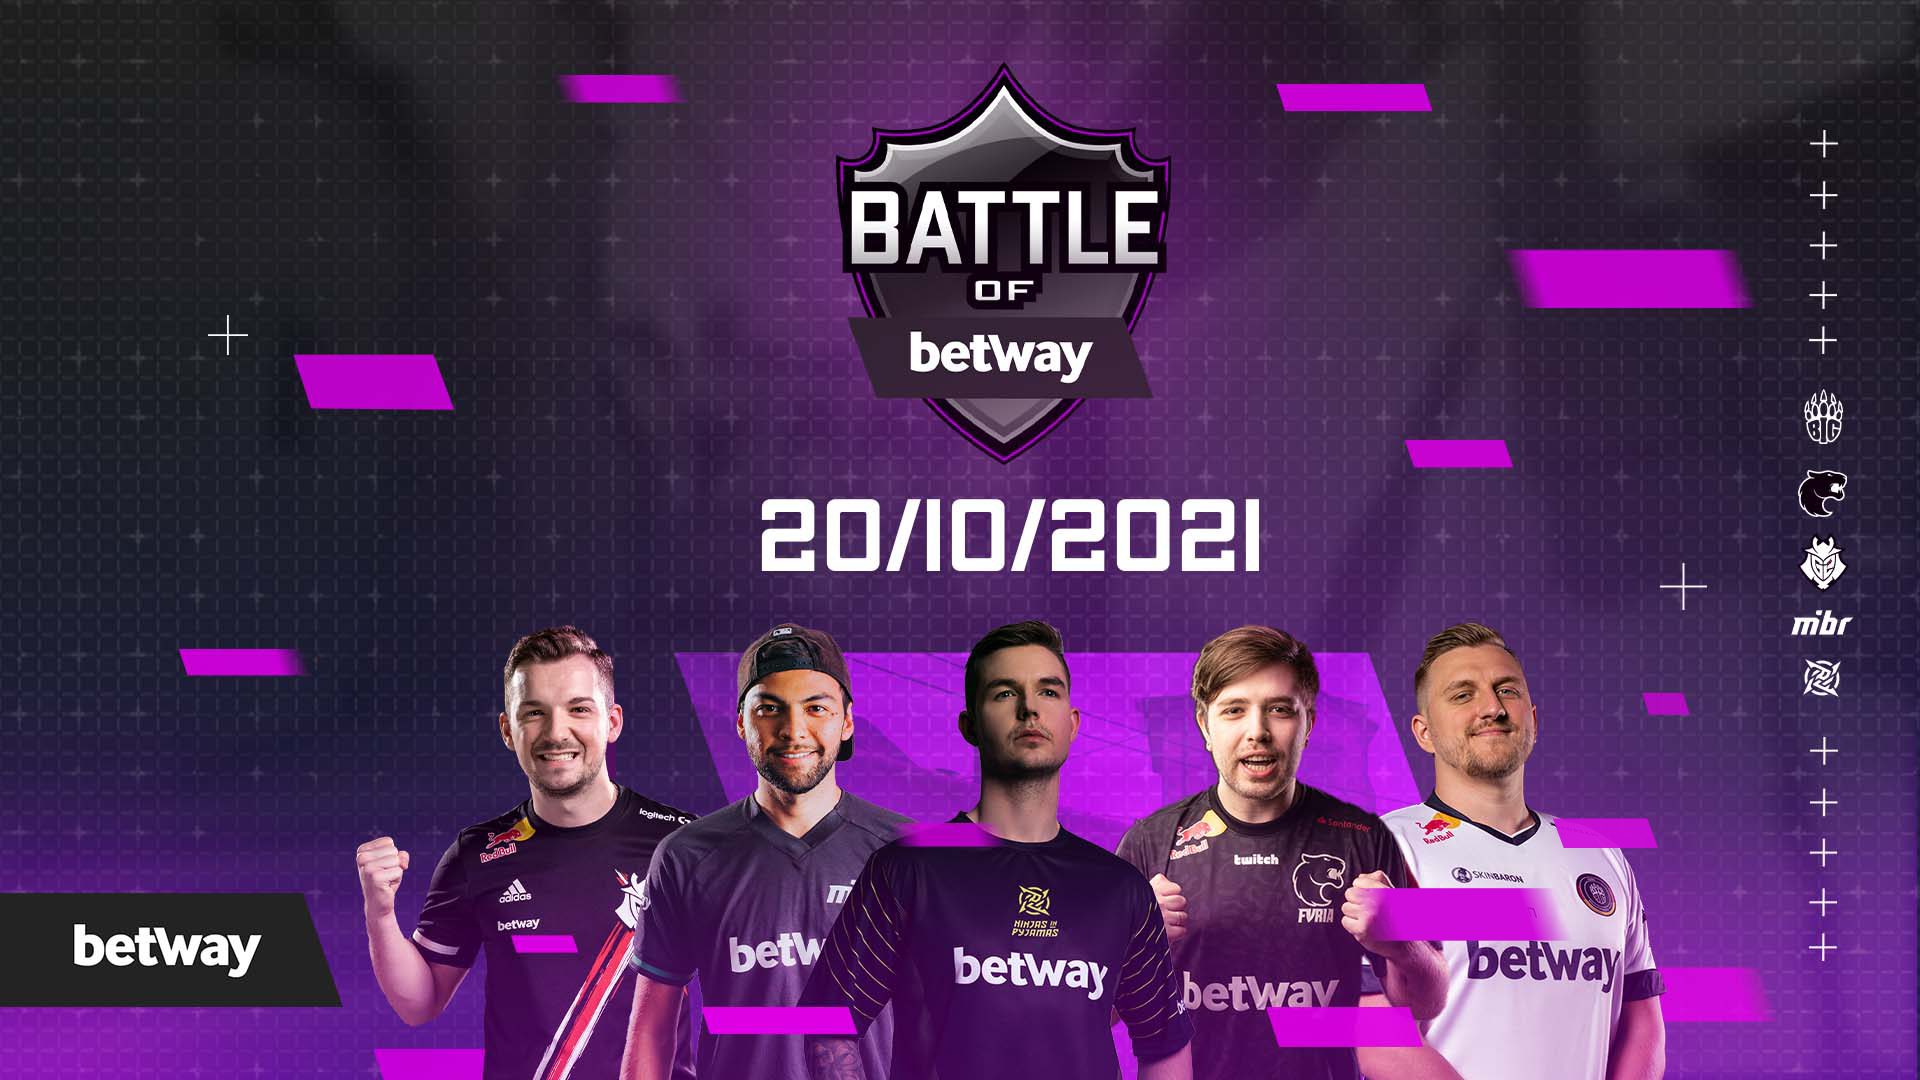 The Battle Of Betway